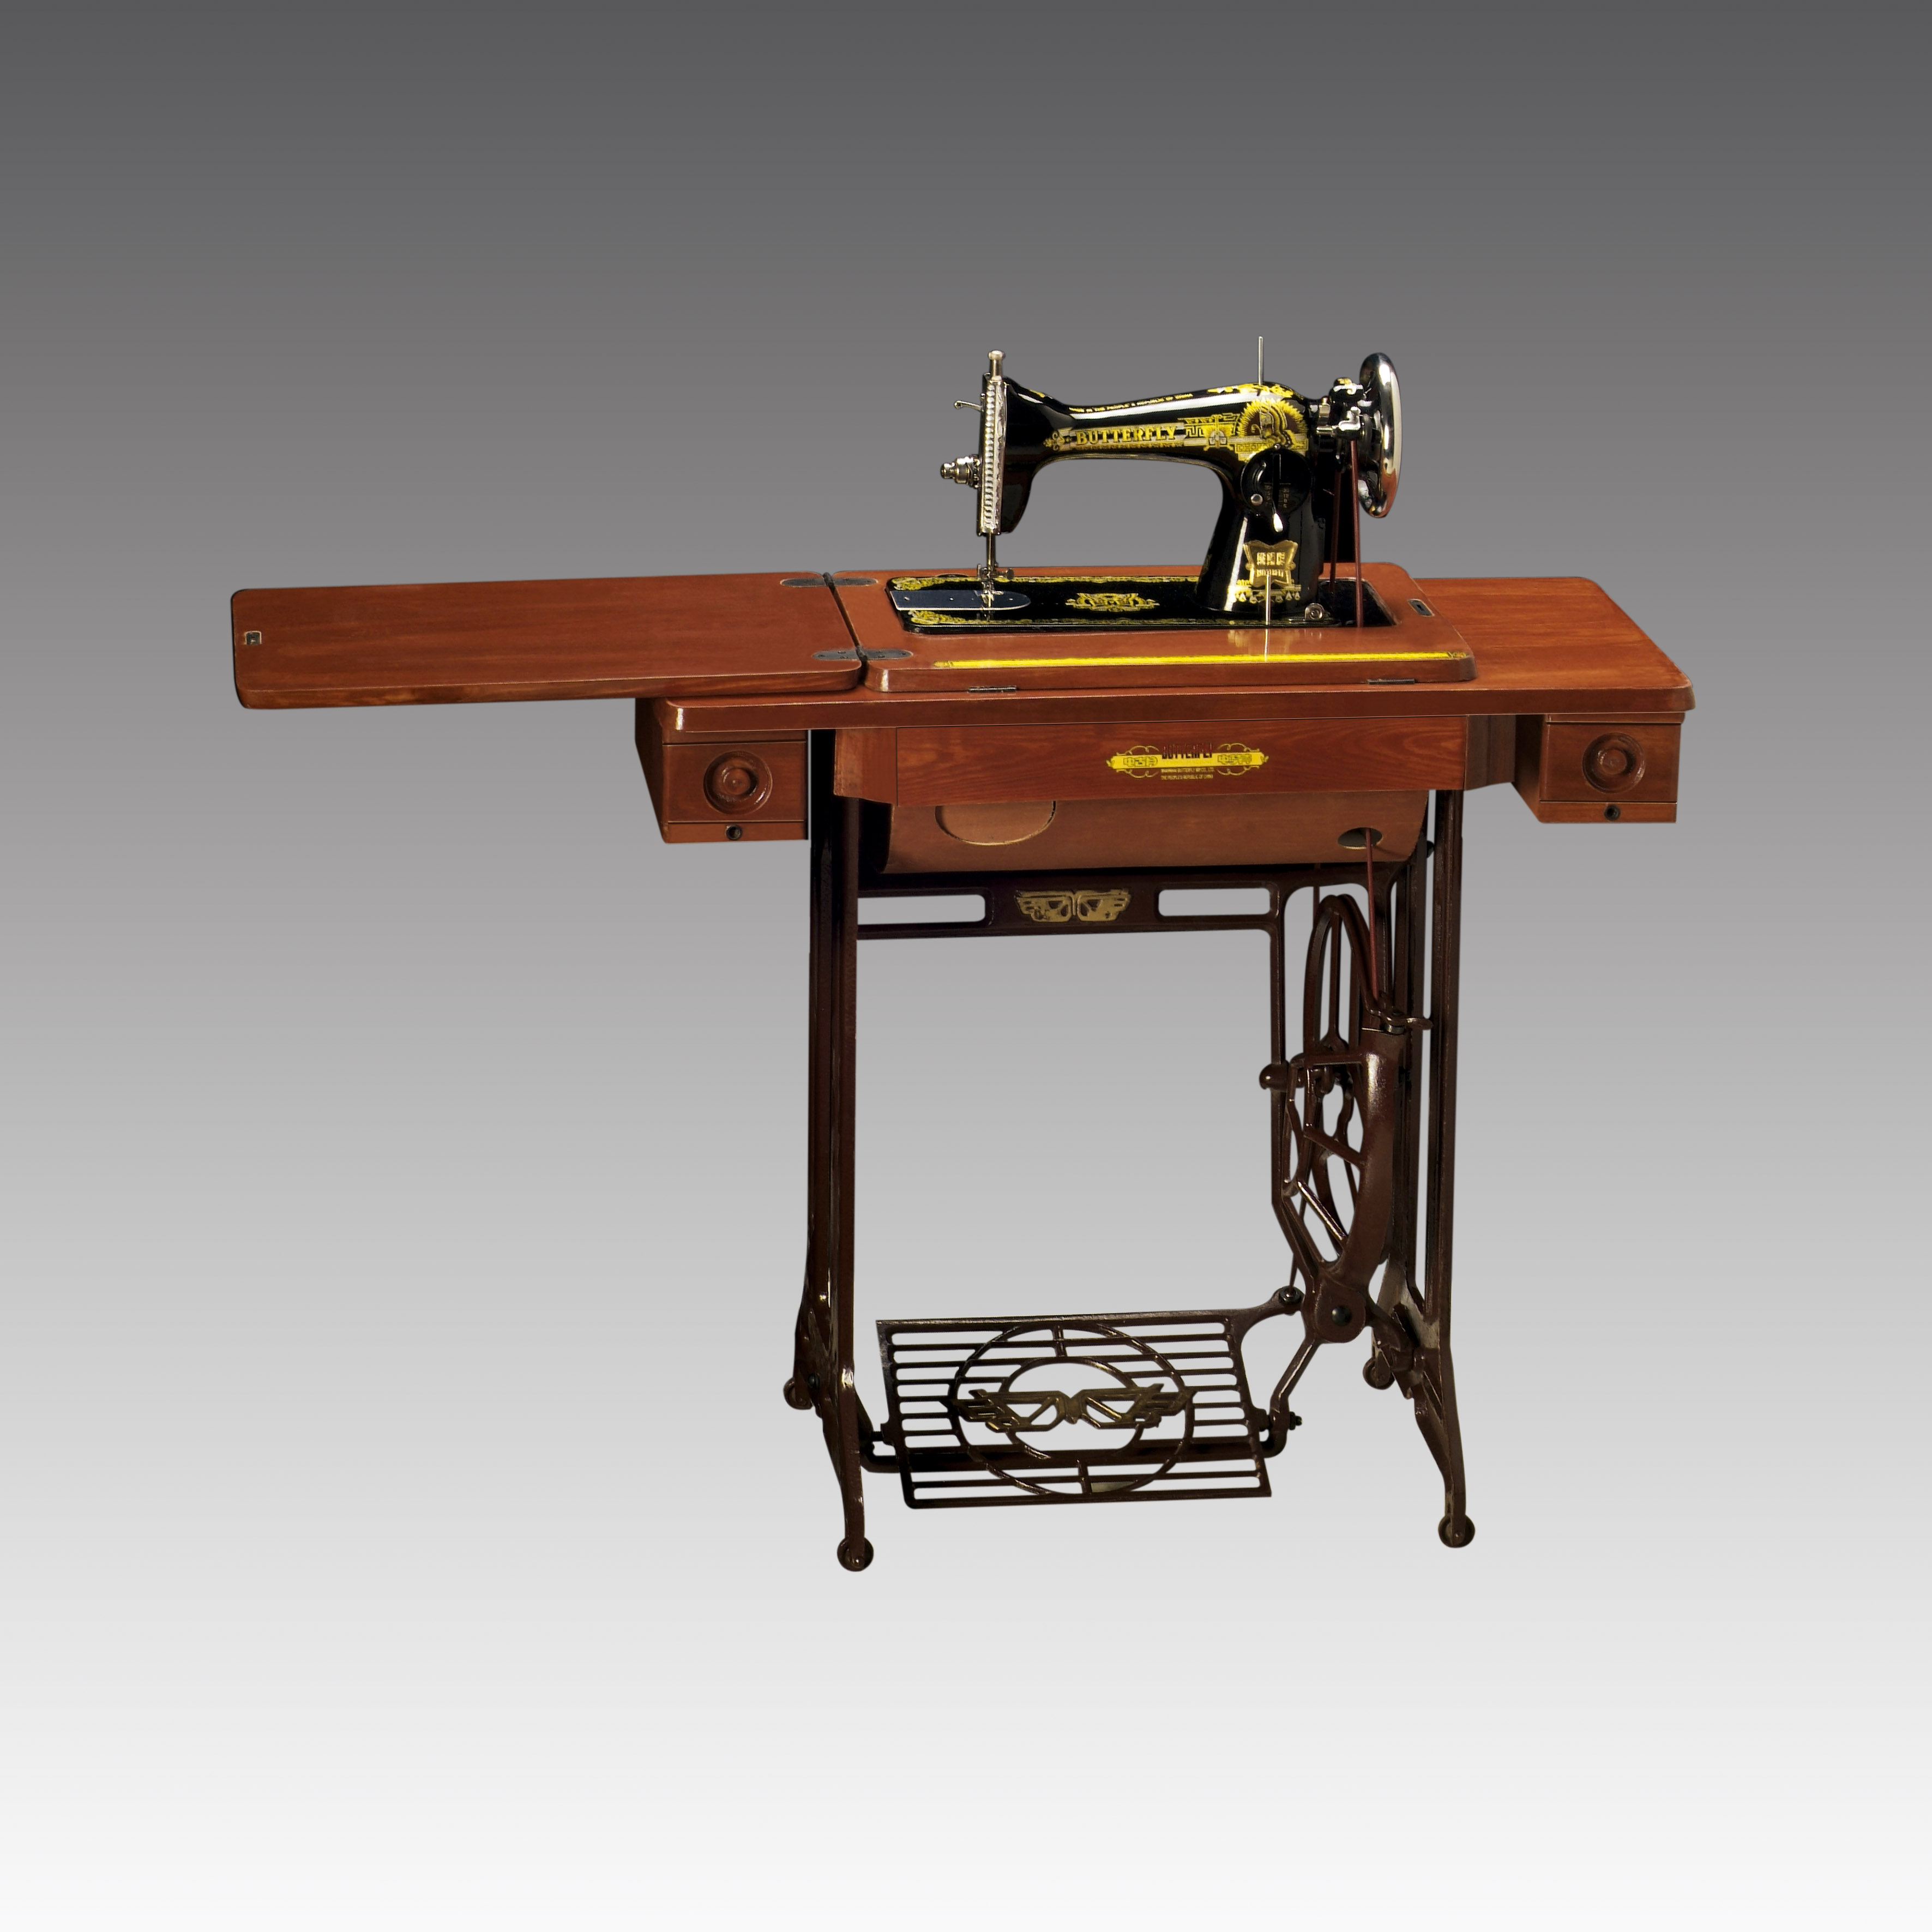 TRADITIONAL DOMESTIC SEWING MACHINE